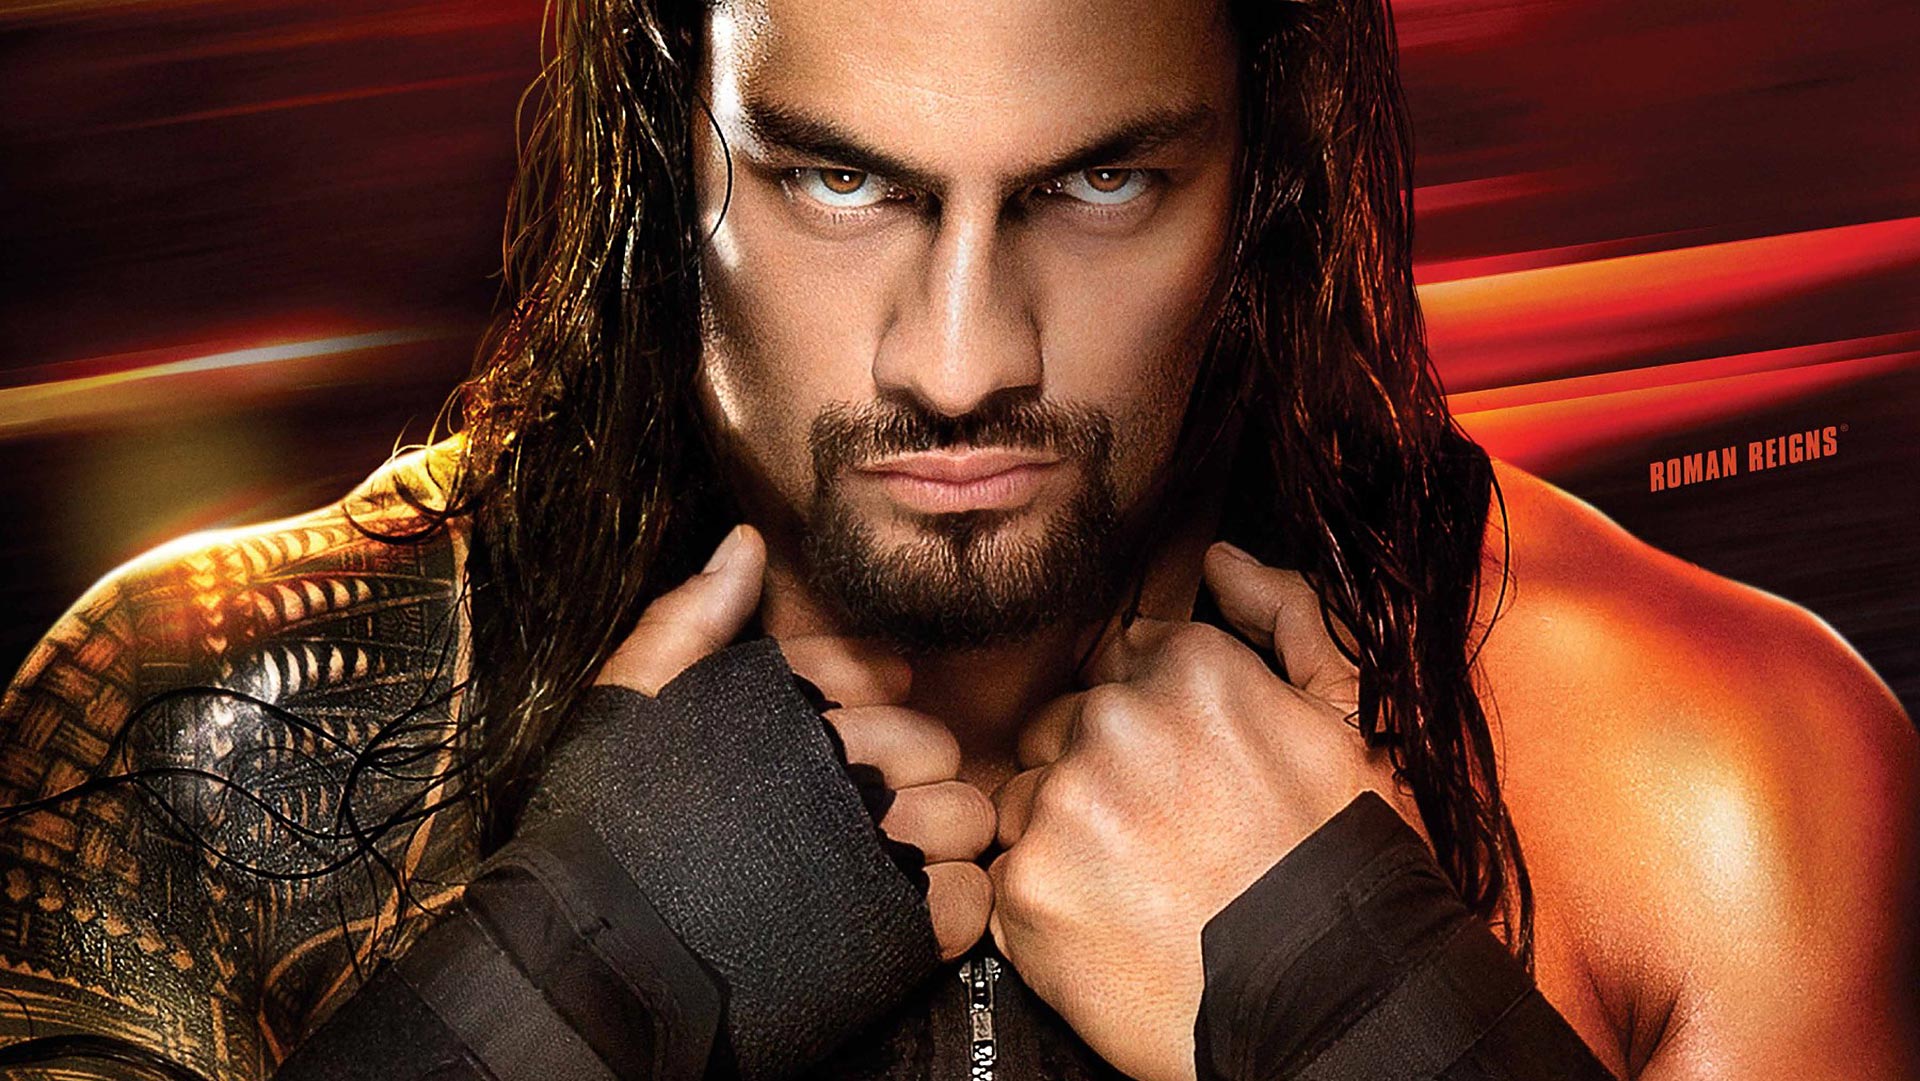 wwe roman reigns game download for pc